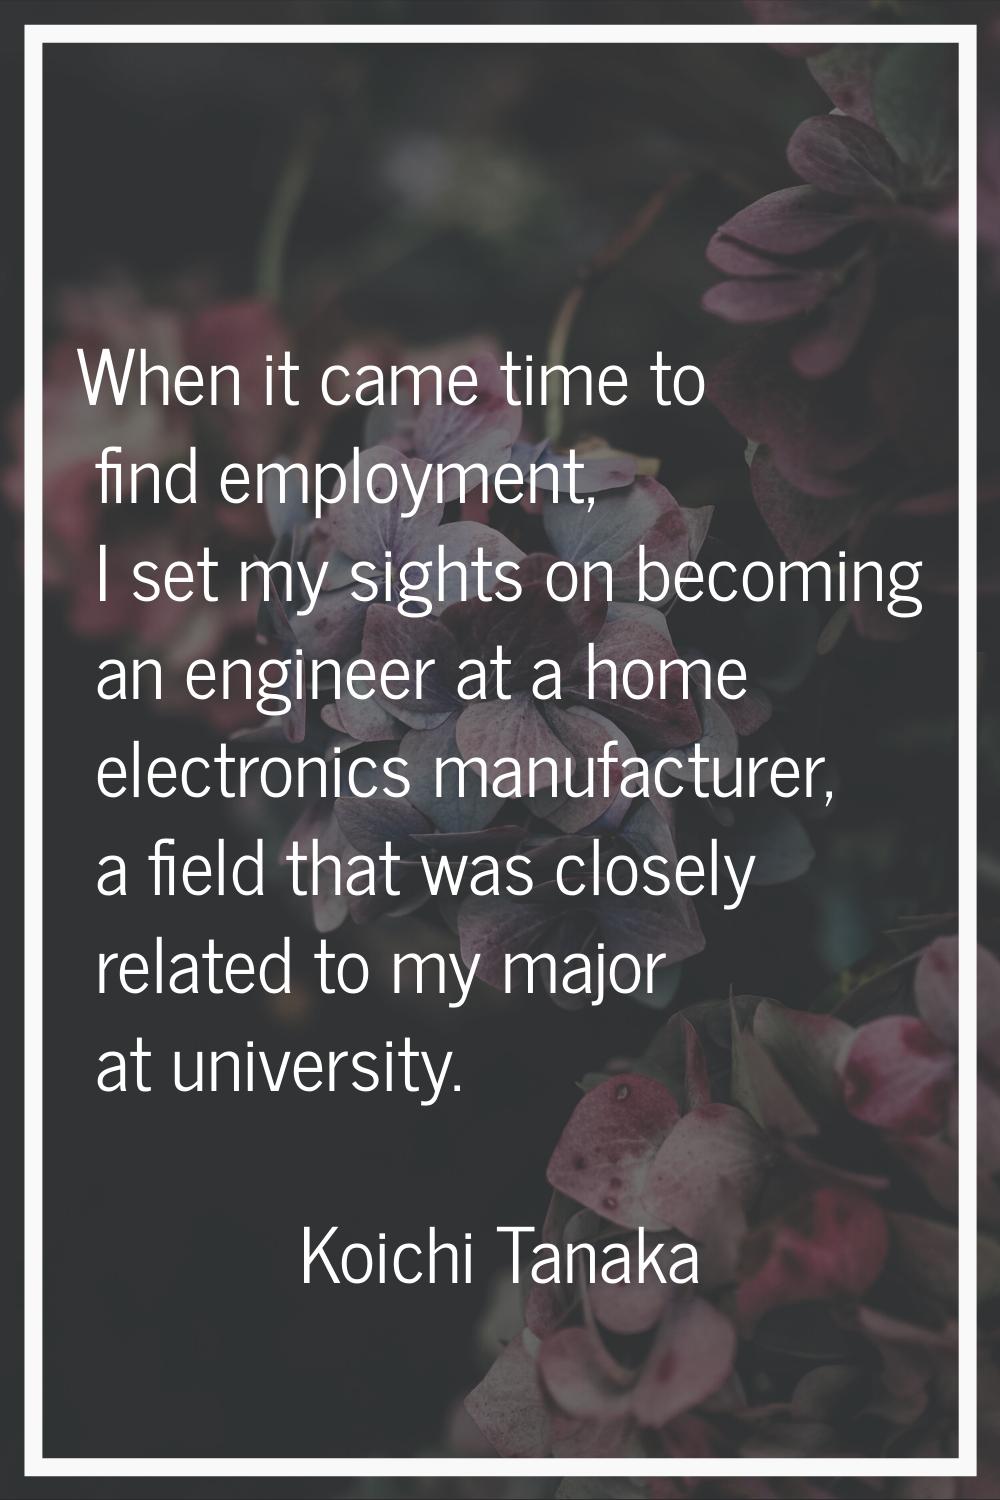 When it came time to find employment, I set my sights on becoming an engineer at a home electronics